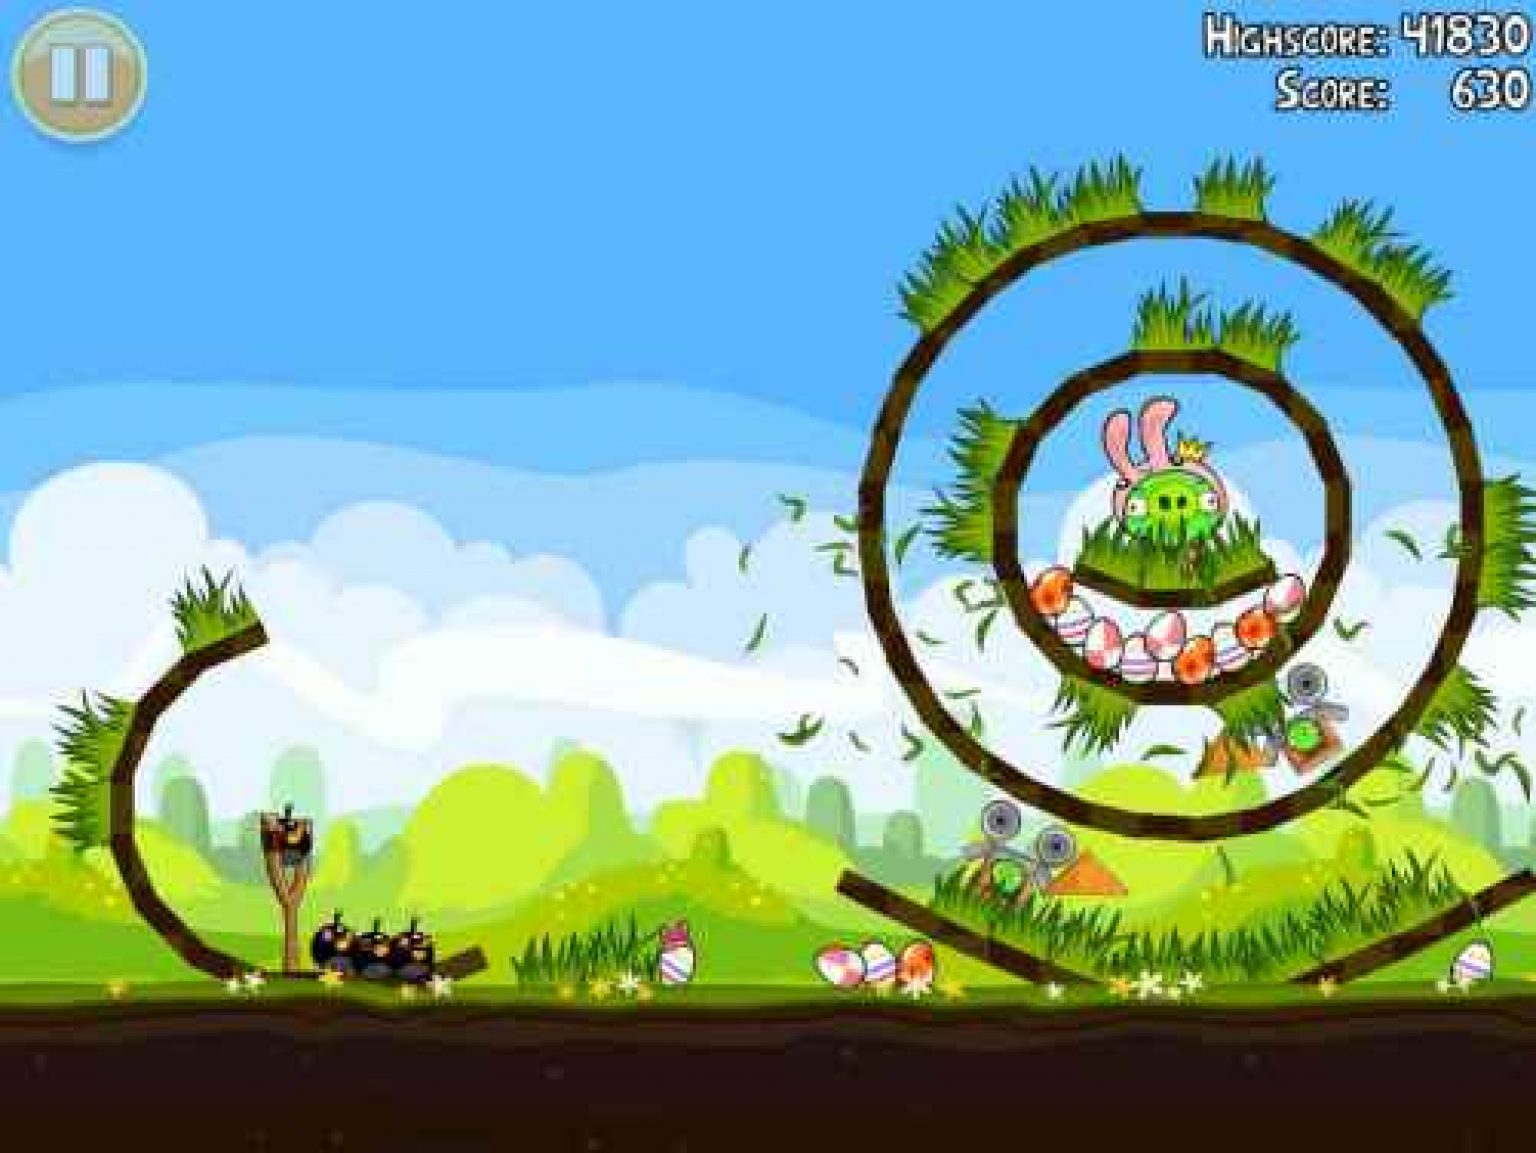 angry birds game free download for pc full version windows 10